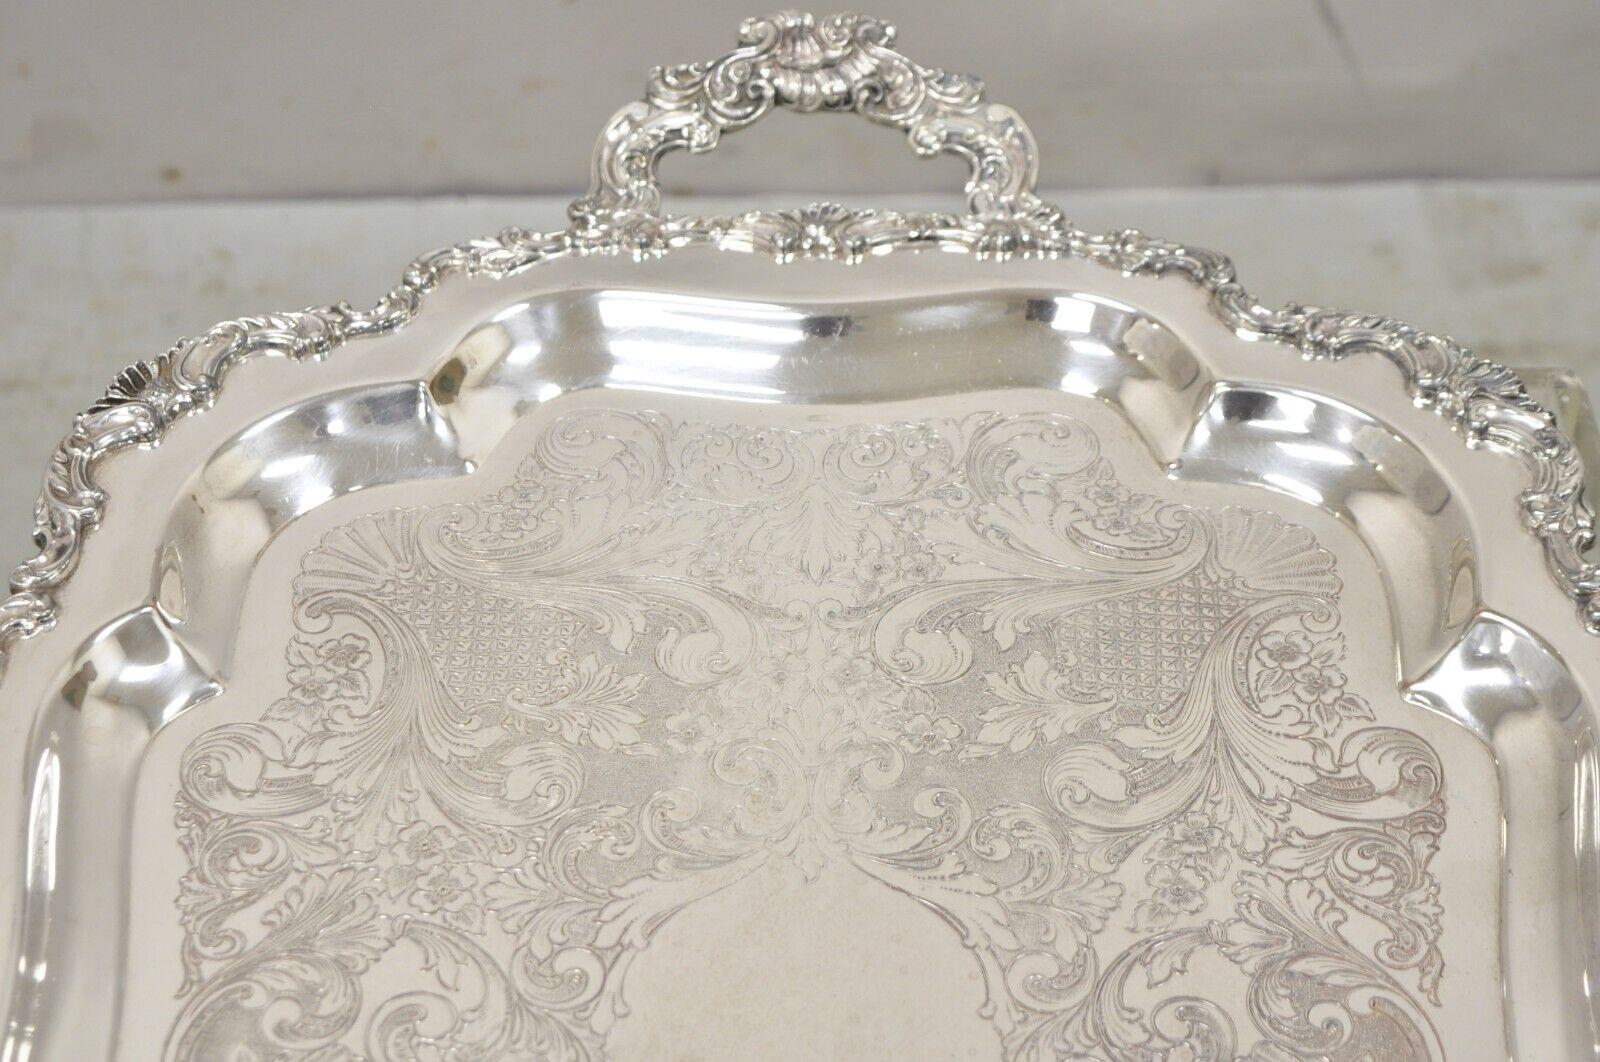 20th Century Community Ascot 0316-10 Silver Plated Ornate Twin Handle Serving Platter Tray For Sale